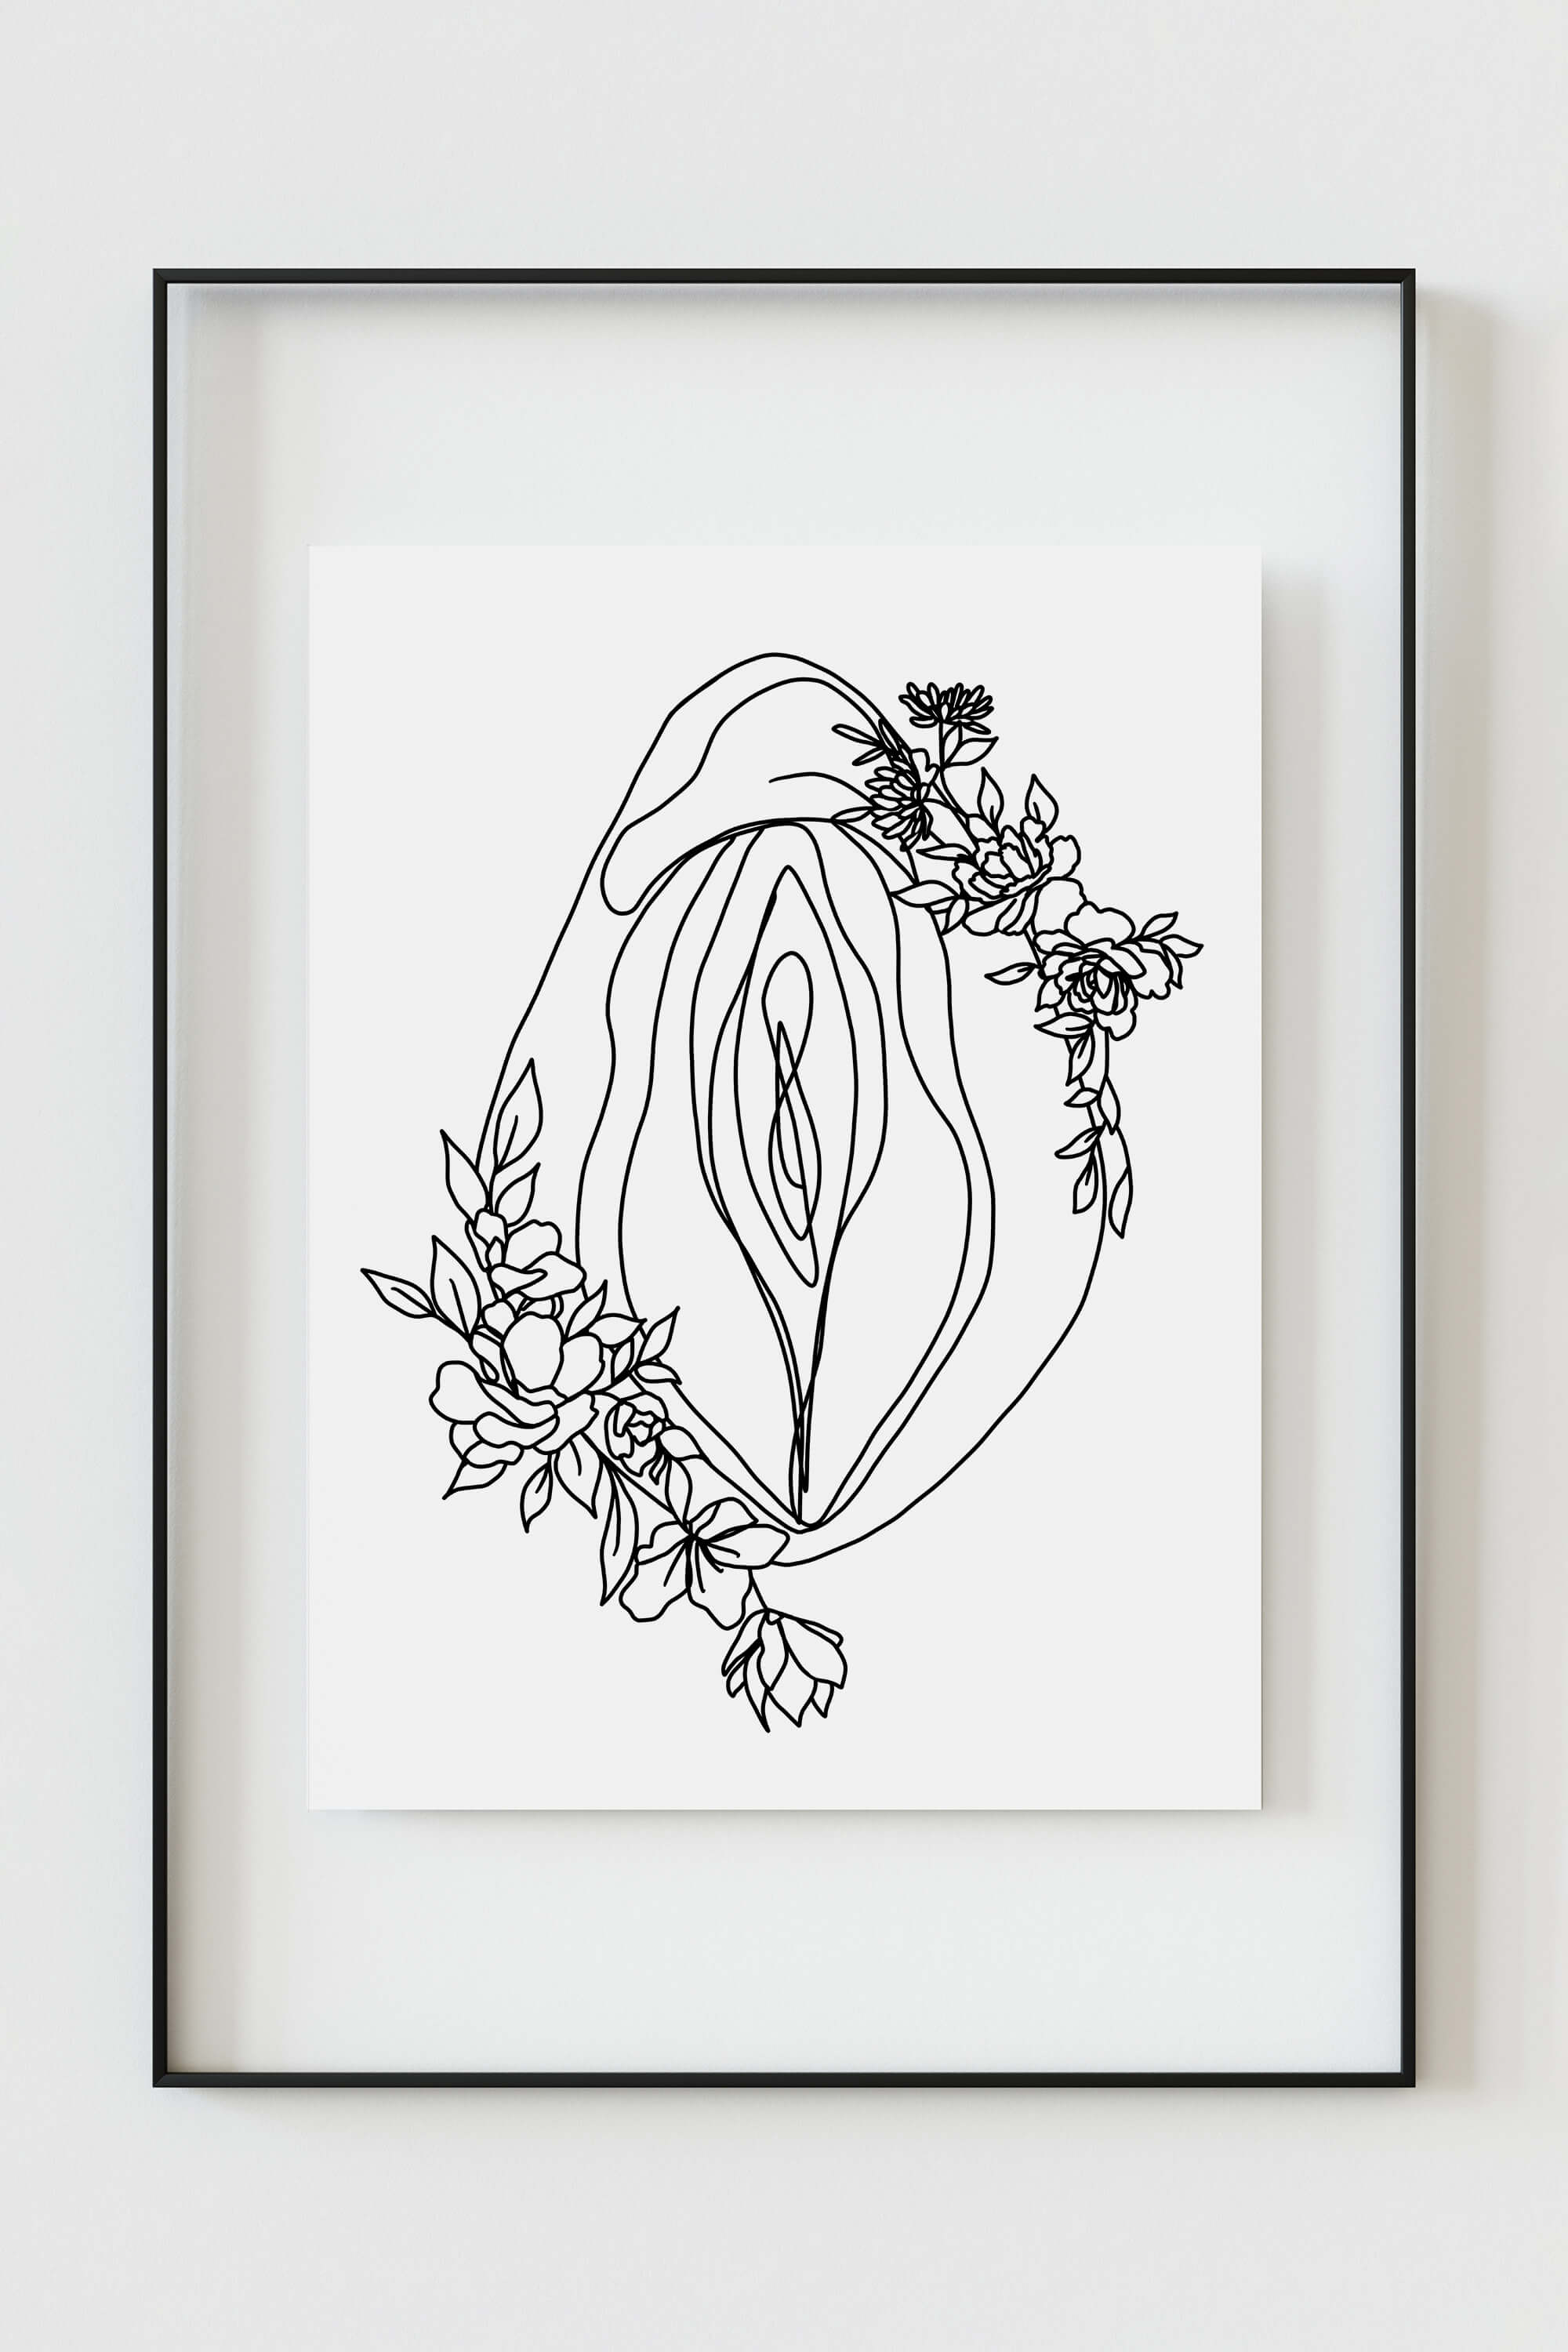 Black and white line drawing of a floral vagina, a powerful and bold feminist statement. The intricate lines capture the beauty and strength inherent in every woman. Ideal for those seeking empowering and modern art prints.